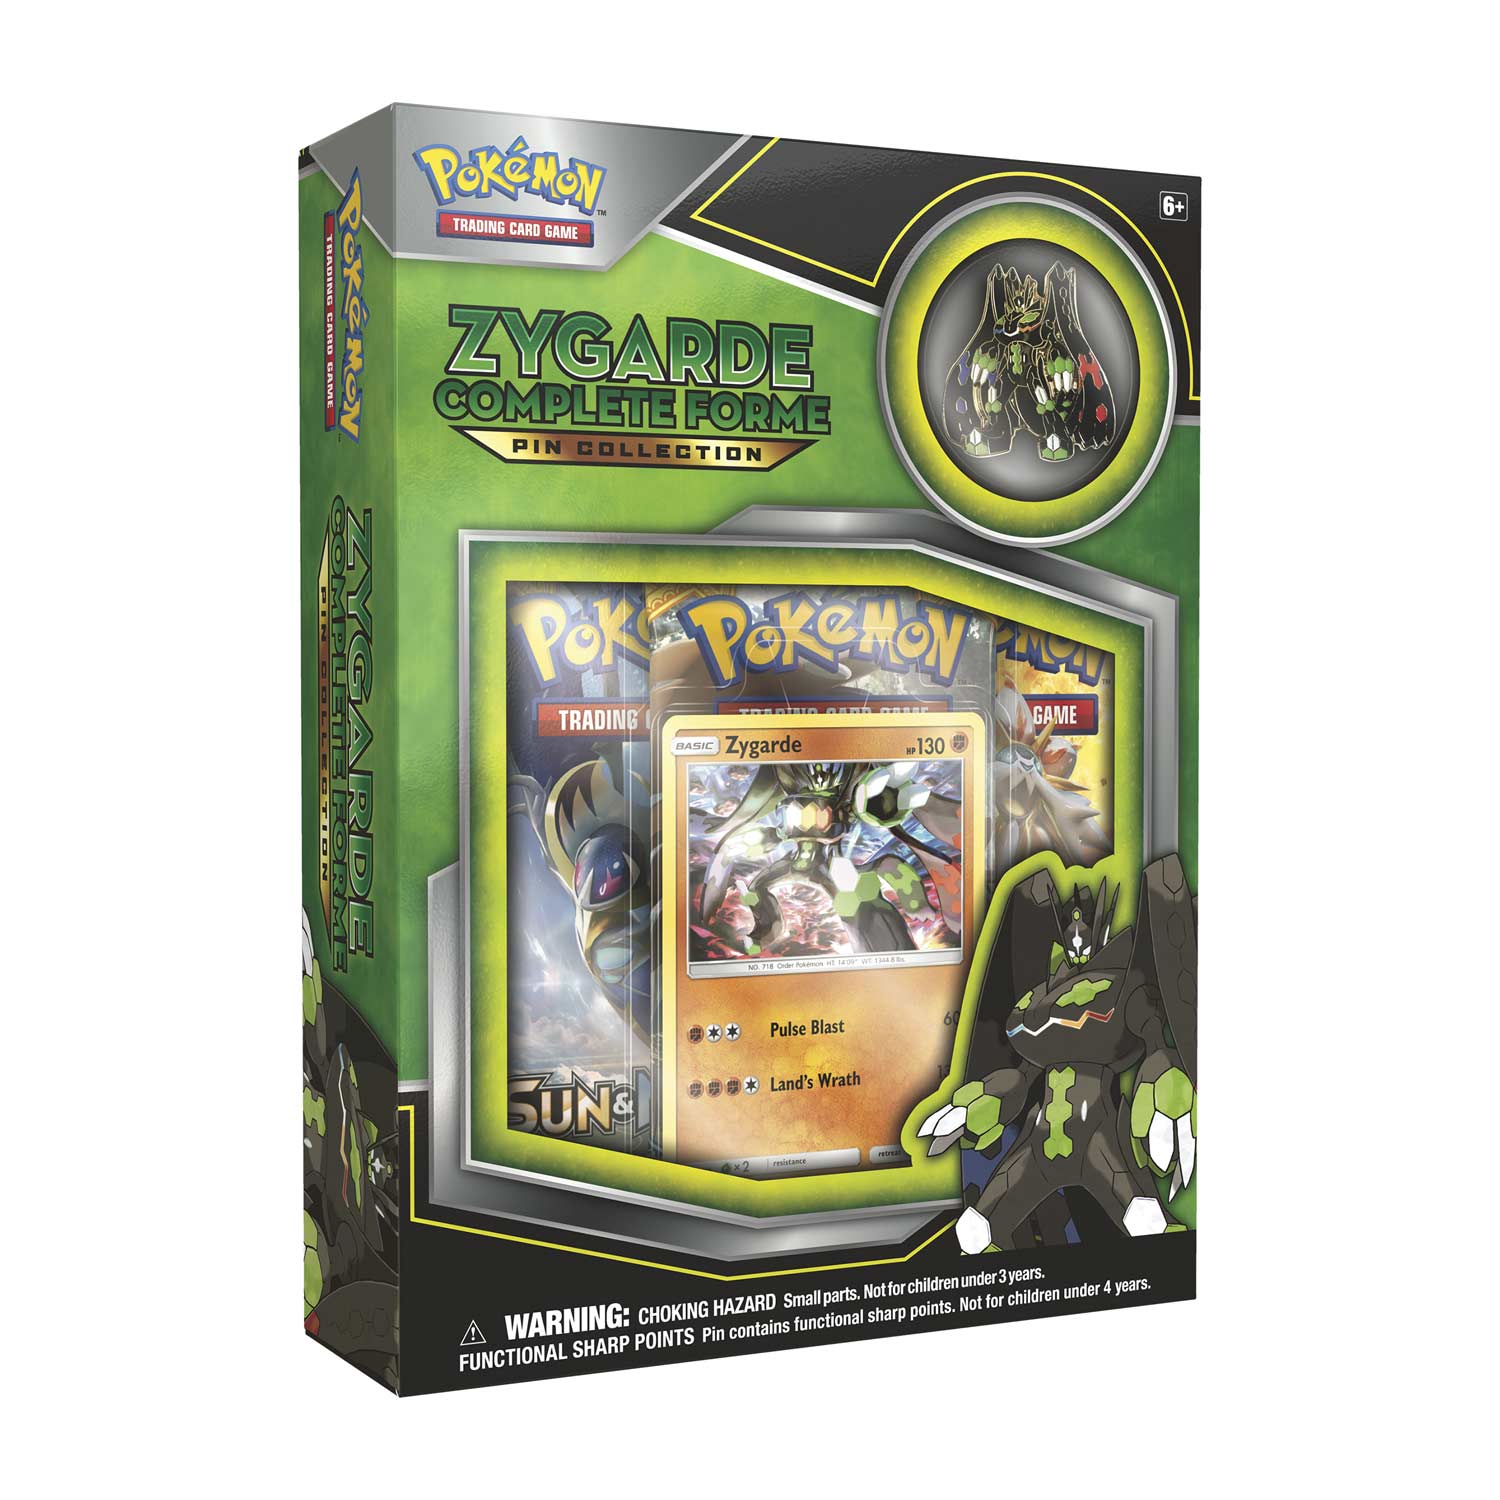 Zygarde Complete Forme Collection Box Pokemon Celestial Storm Lot of 31 Packs 